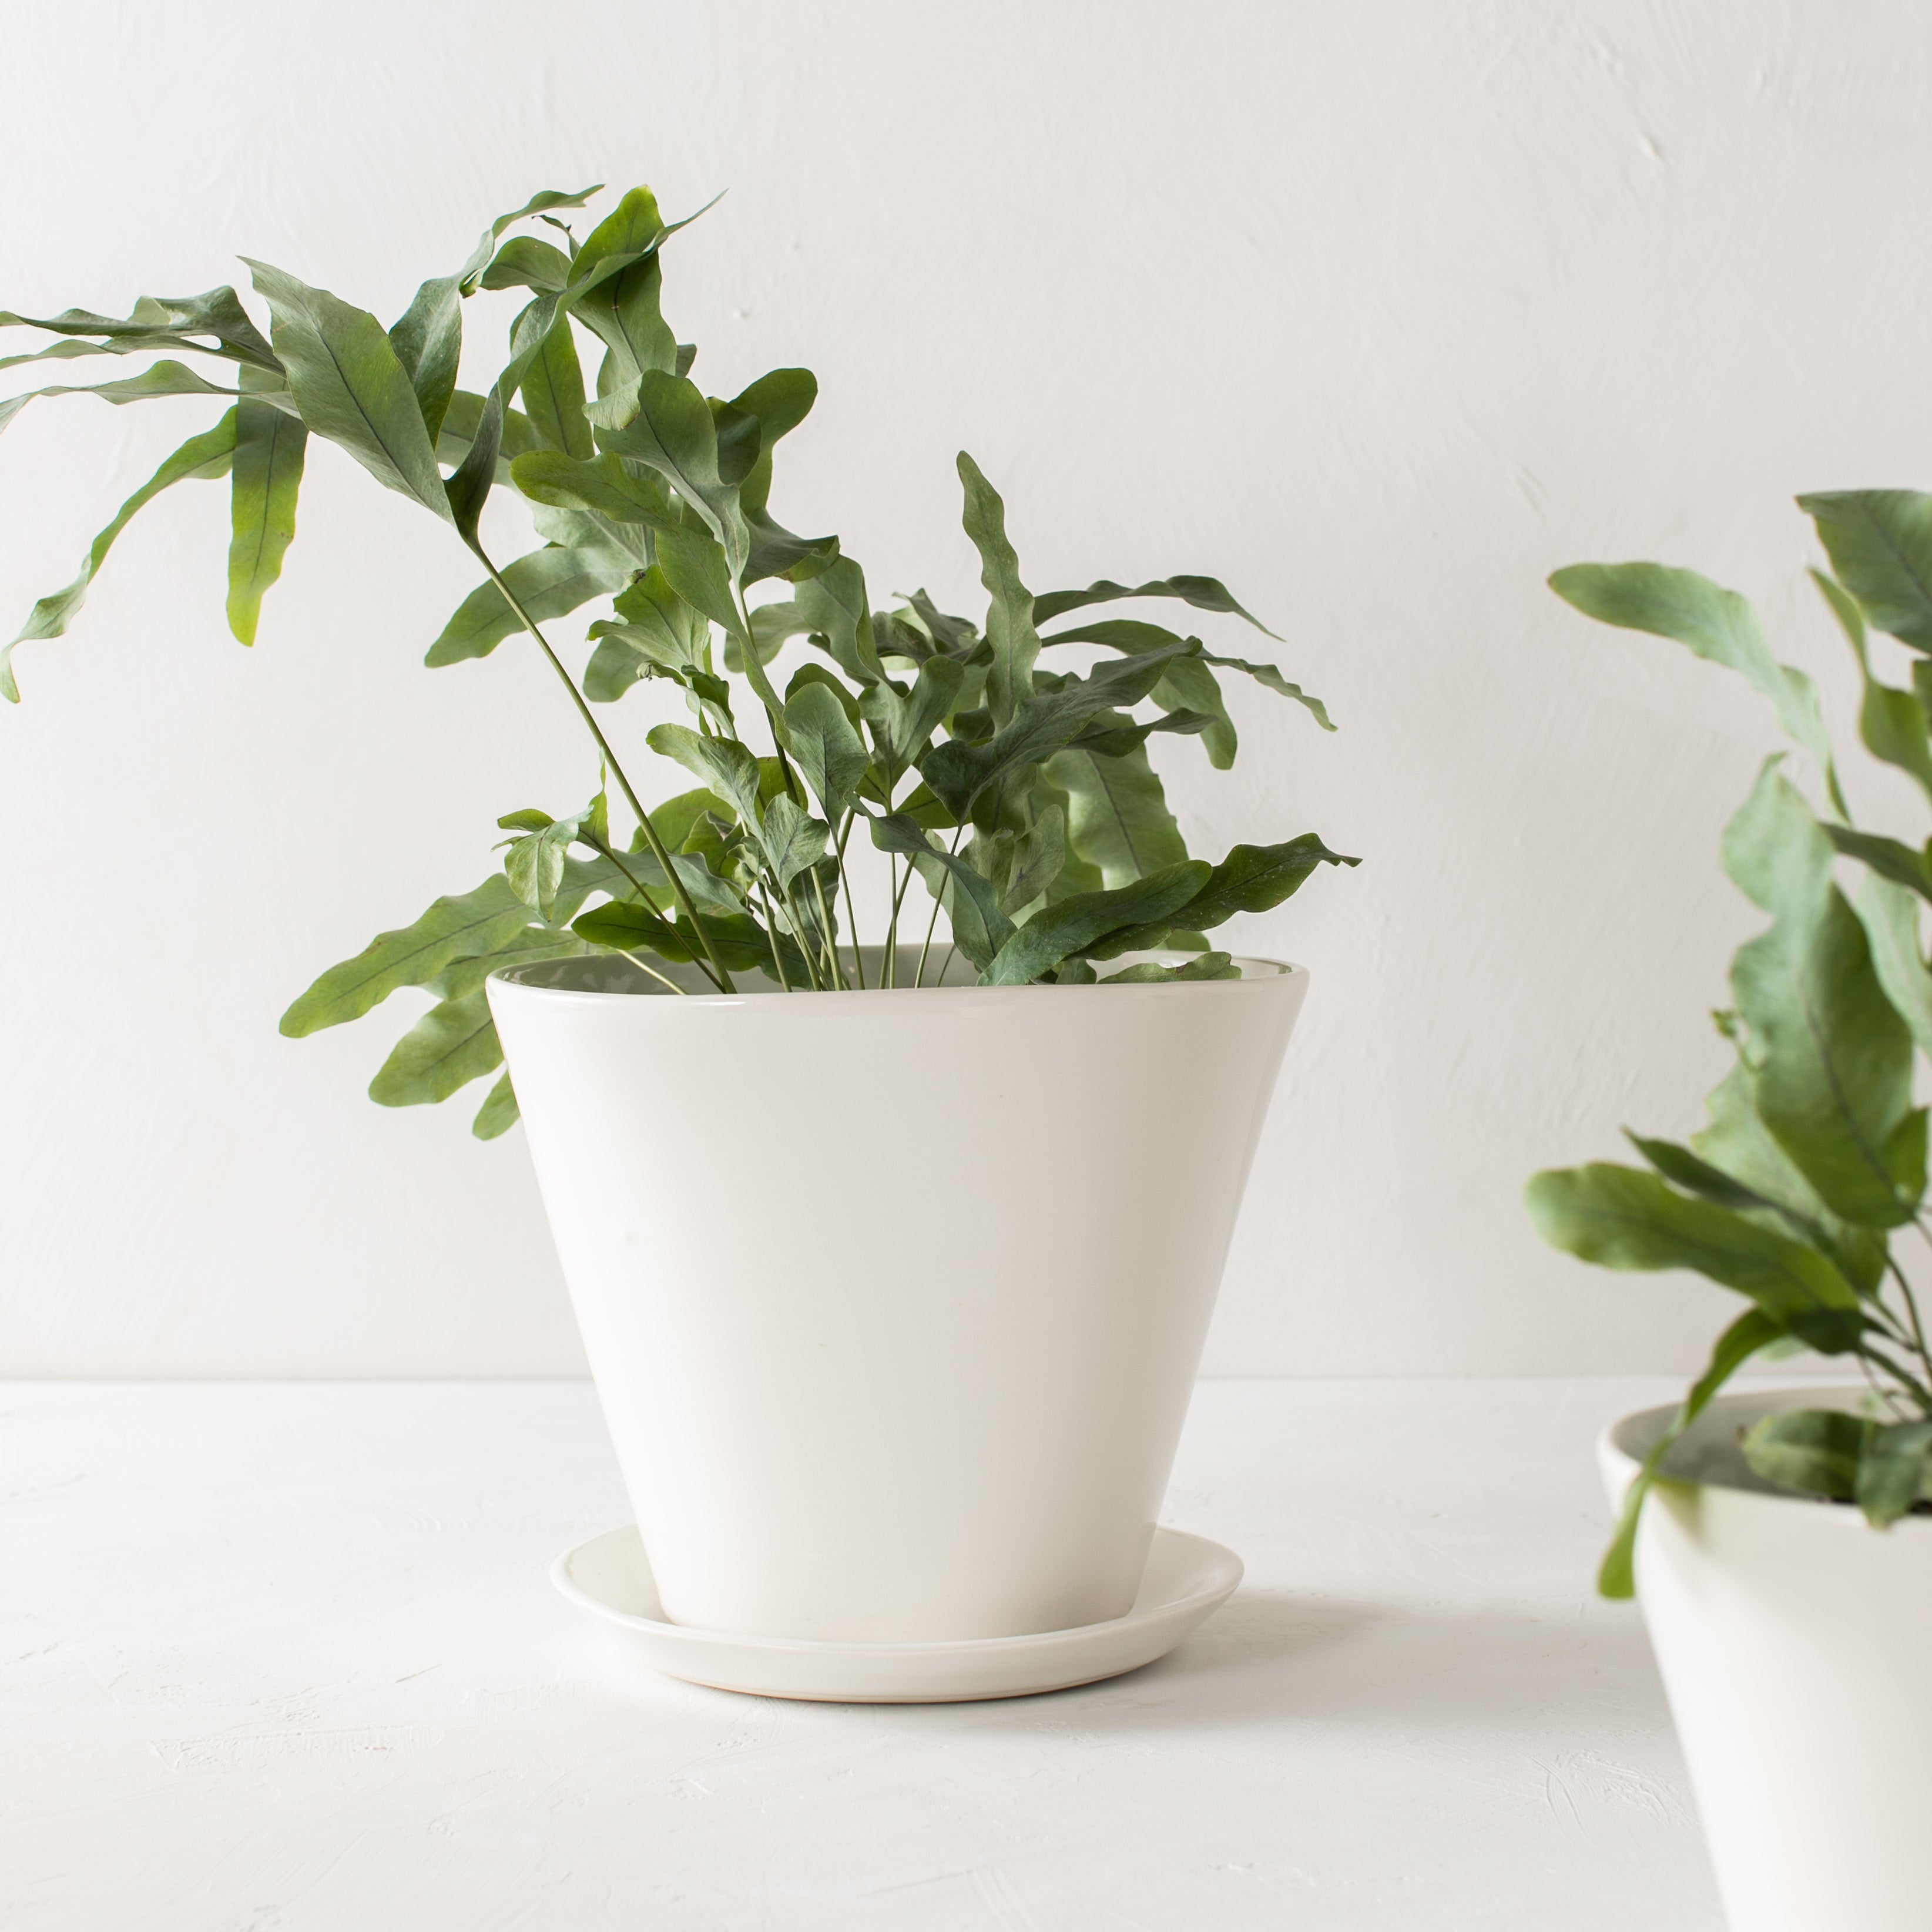 Minimal white 7 inch tapered planter with plant inside, as well as a bottom drainage dish. Designed and sold by Convivial Production, Kansas City Ceramics.